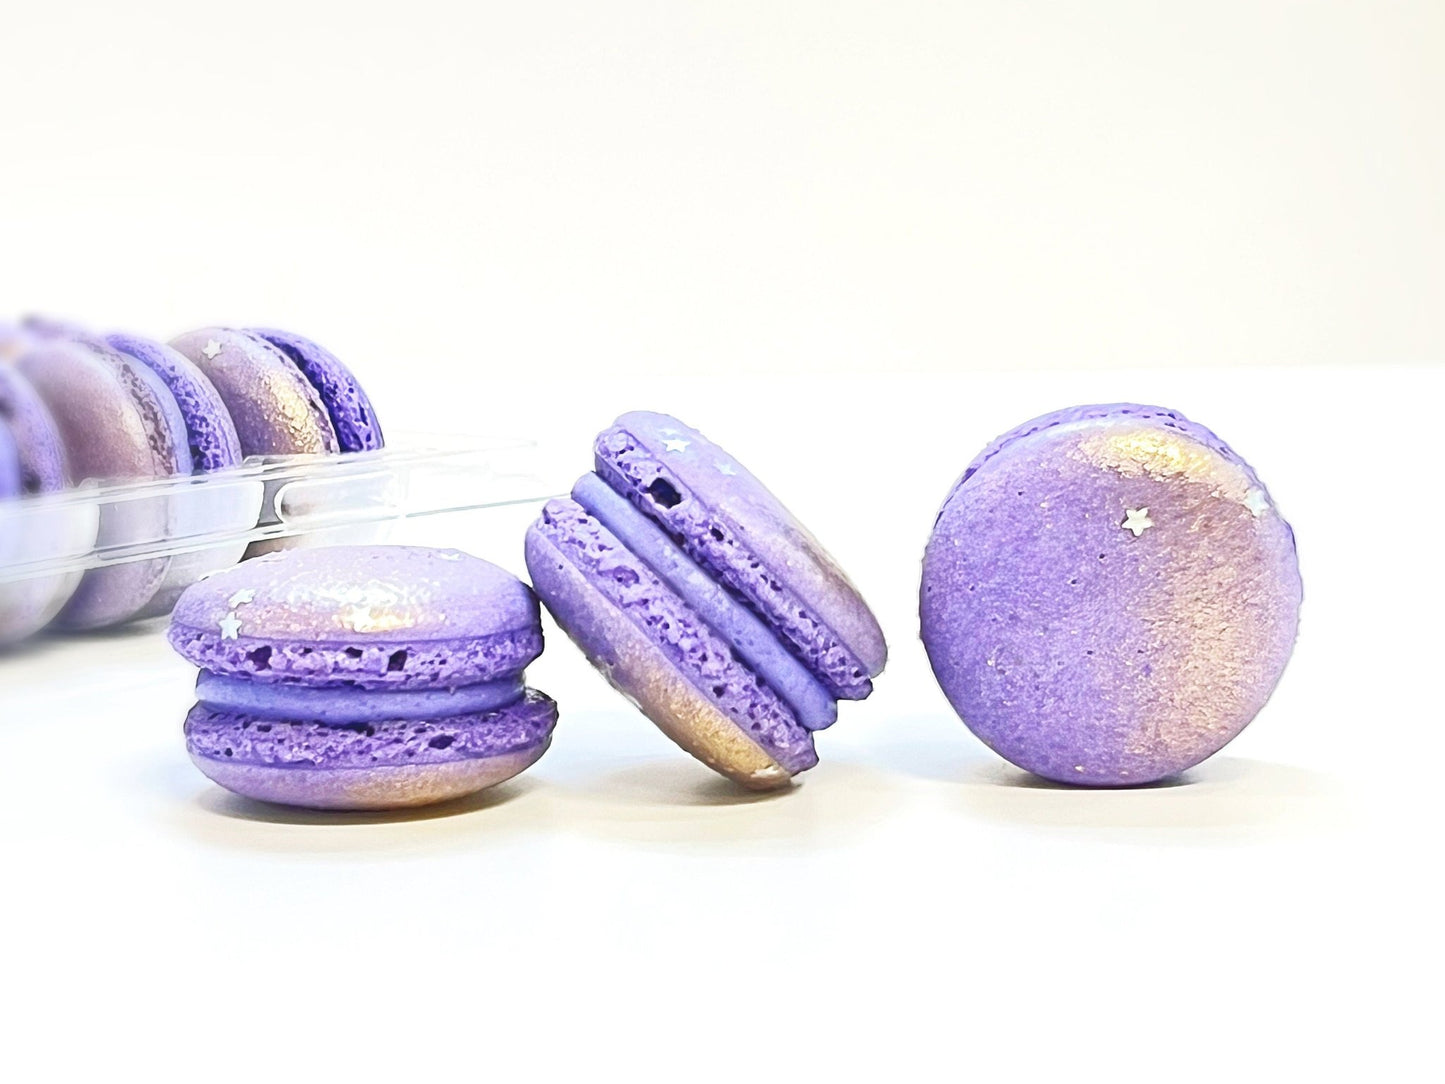 Space Edition Mac | The Neptune French Macaron | Available in 6, 12 & 24 - Macaron Centrale6 Pack